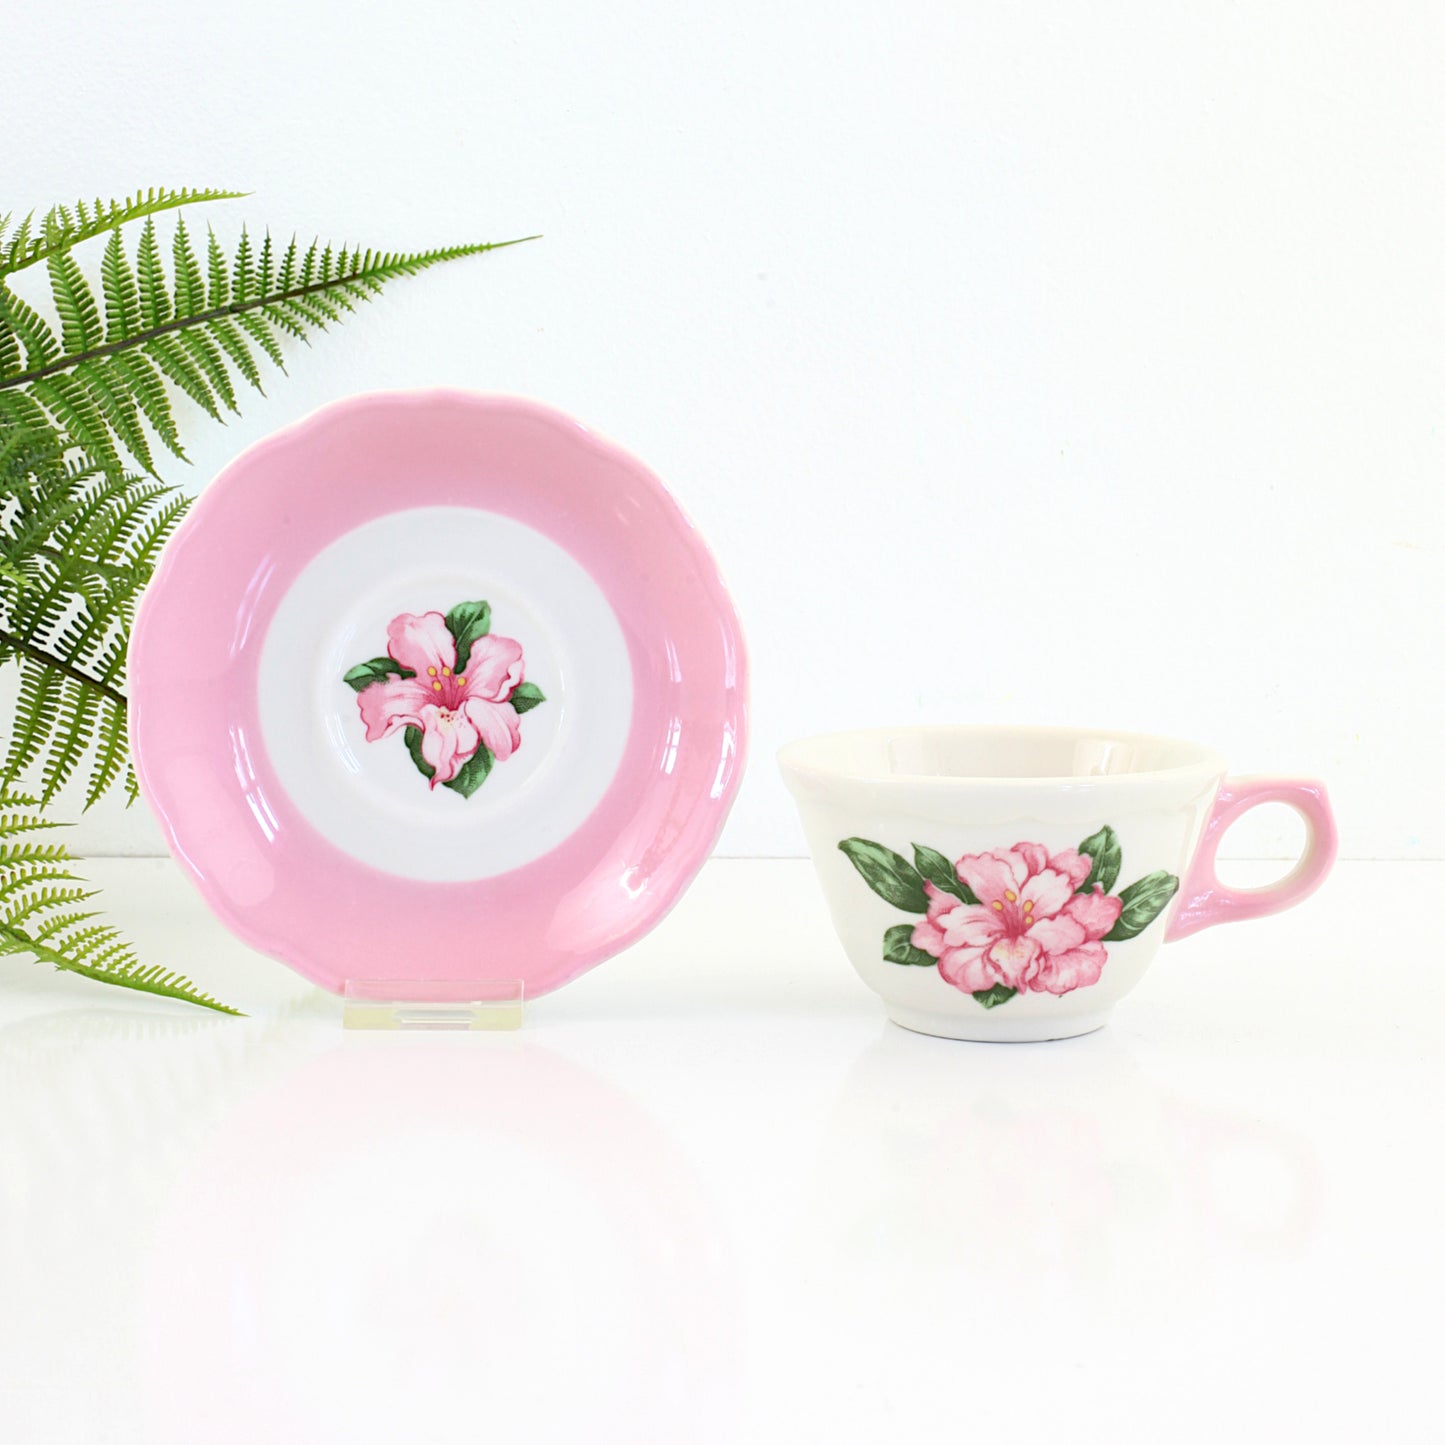 SOLD - Vintage Greenbrier Pink Rhododendron Cup & Saucer